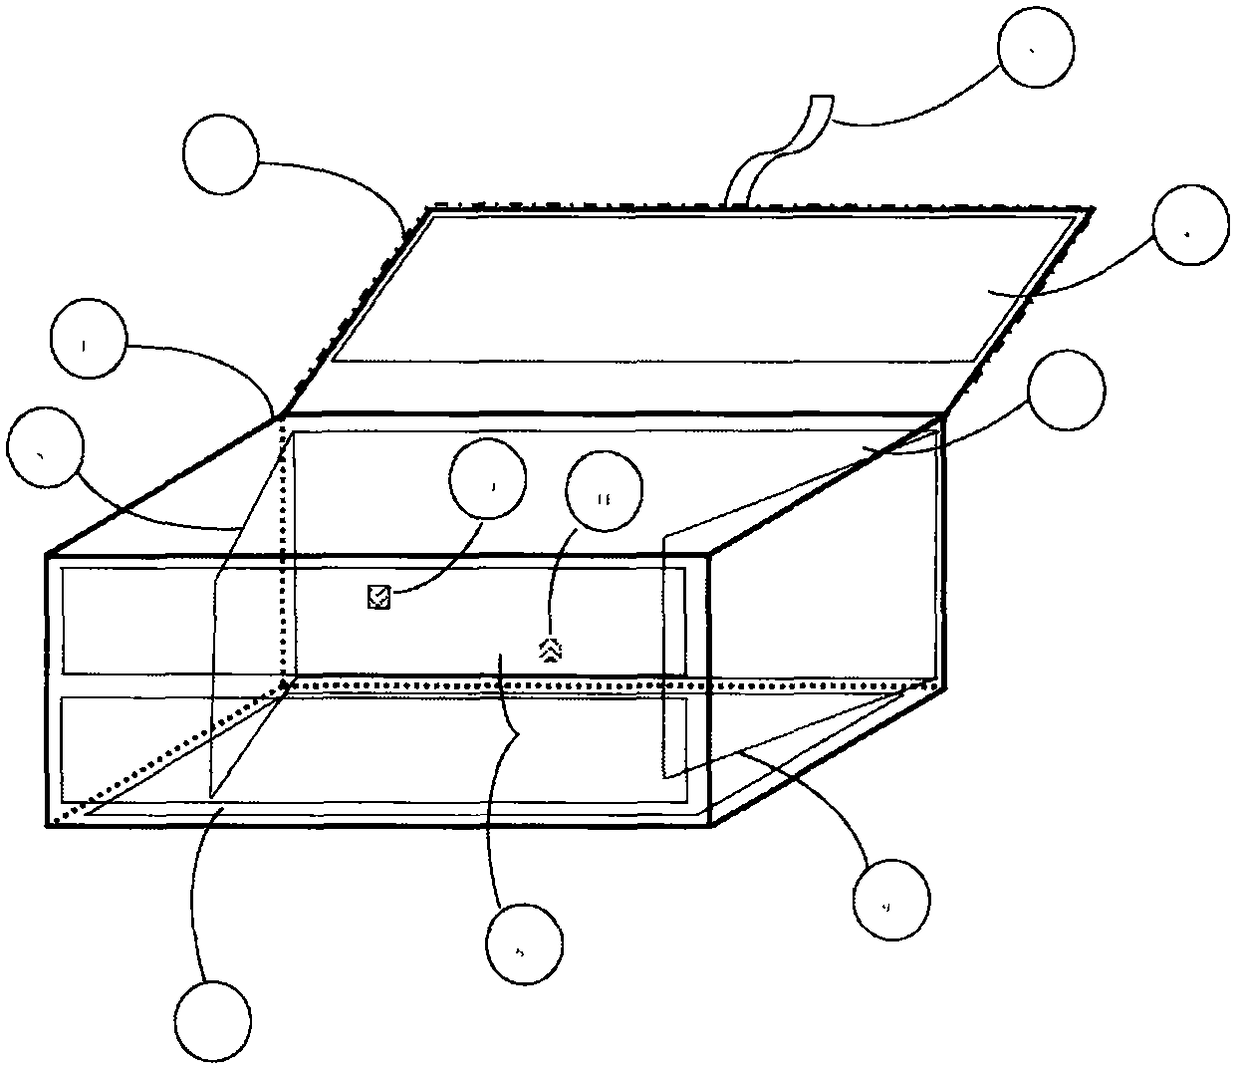 Packaging bag capable of being rapidly expanded and contracted